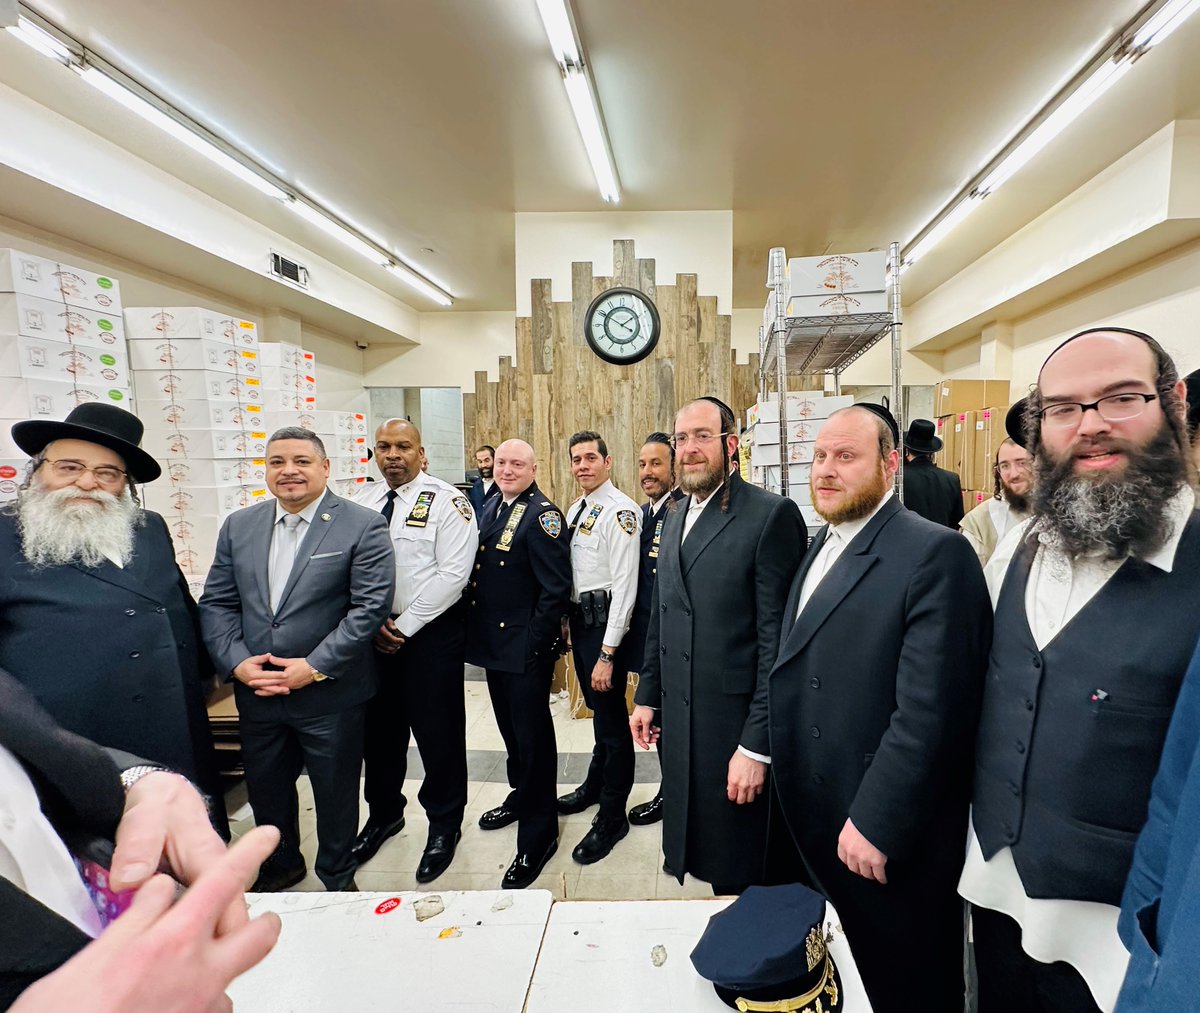 Ahead of the Jewish Passover Holiday, I joined community leaders from Williamsburg, alongside the @NYPDPC Caban, @NYPDBklynNorth Chief Henderson and the Commanding Officers of the @NYPD79Pct, and @NYPD94Pct at the Passover Matzah Bakery. The key to prosperity is public safety